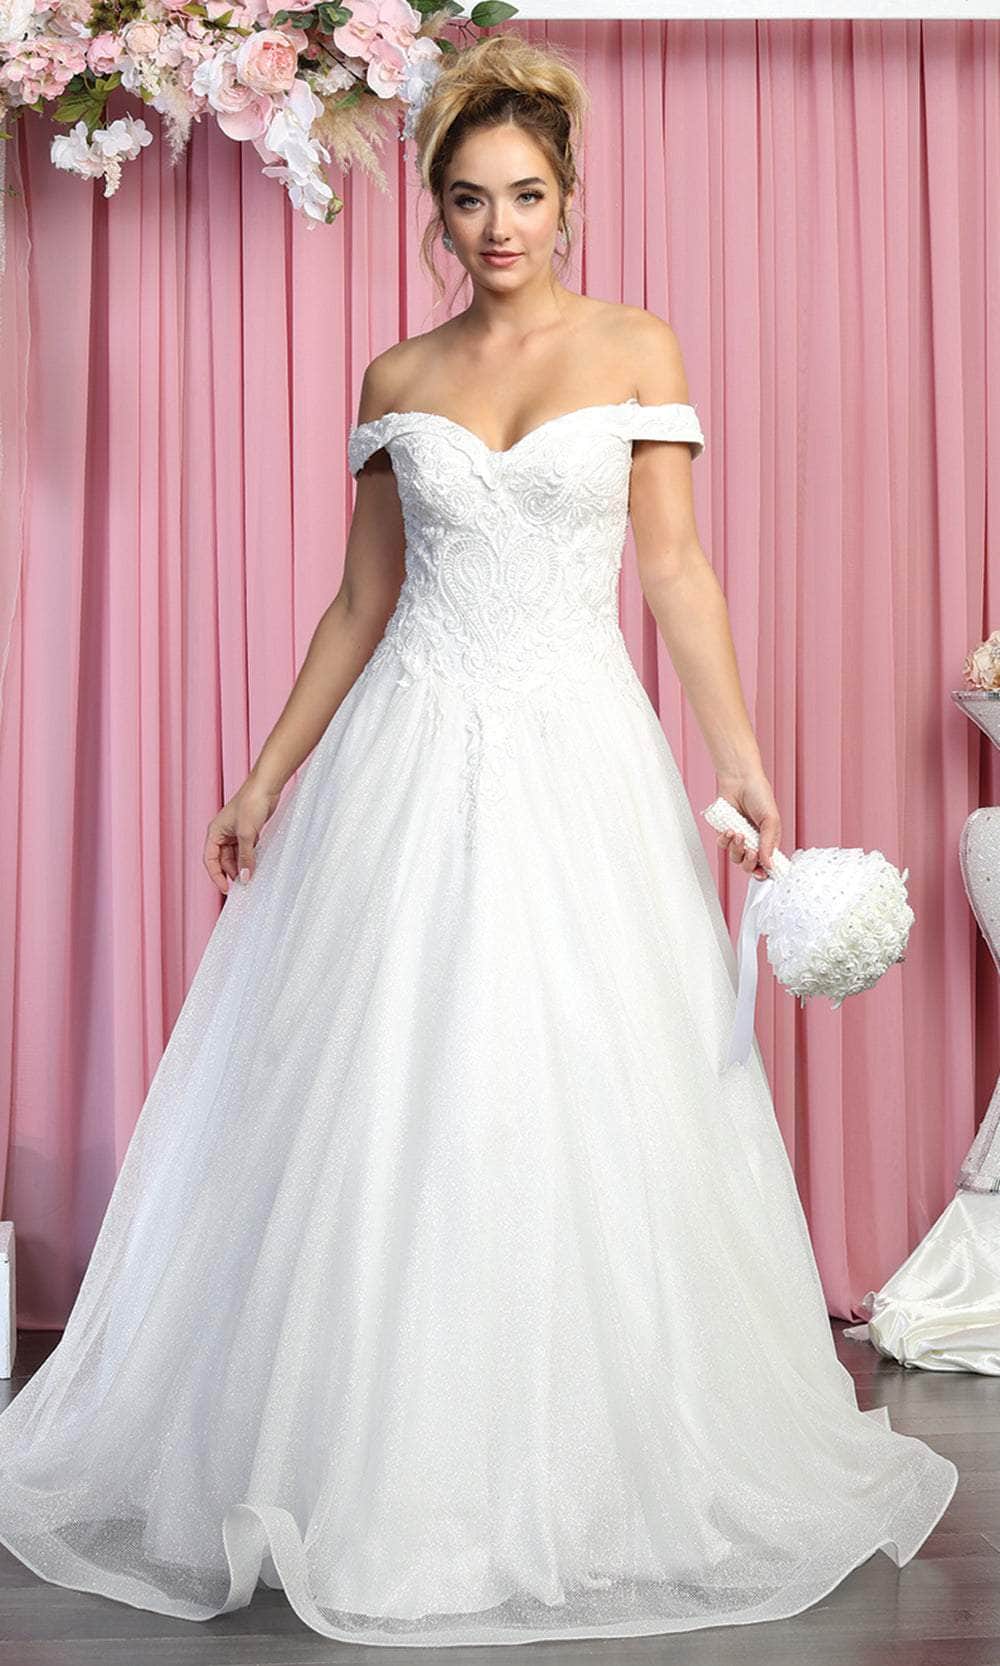 Strapless Sweetheart Lace Fit And Flare Wedding Dress | Kleinfeld Bridal